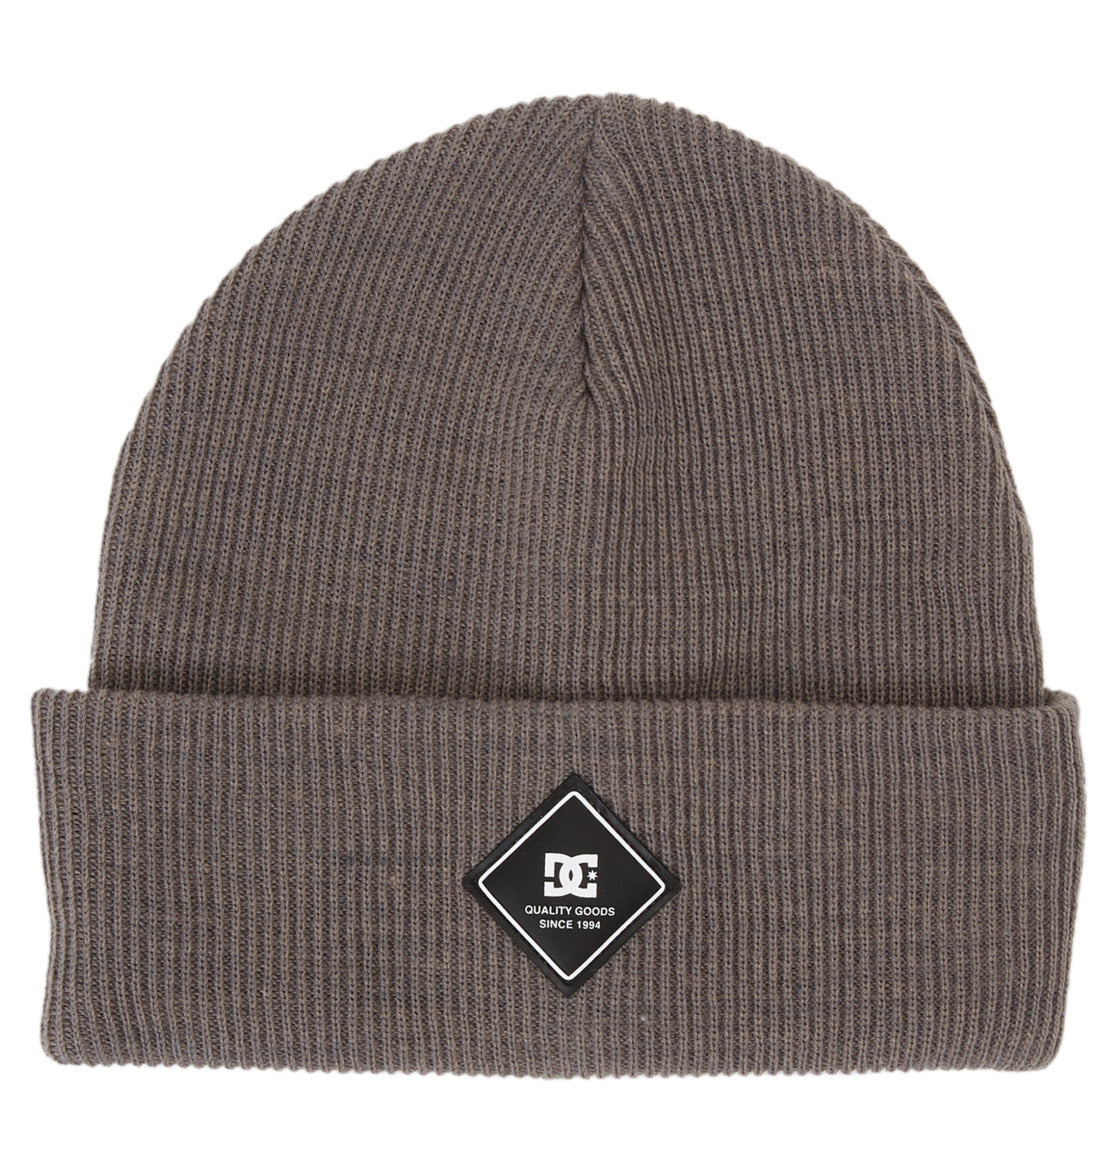 DC - YOUTH LABEL BEANIE - PEWTER